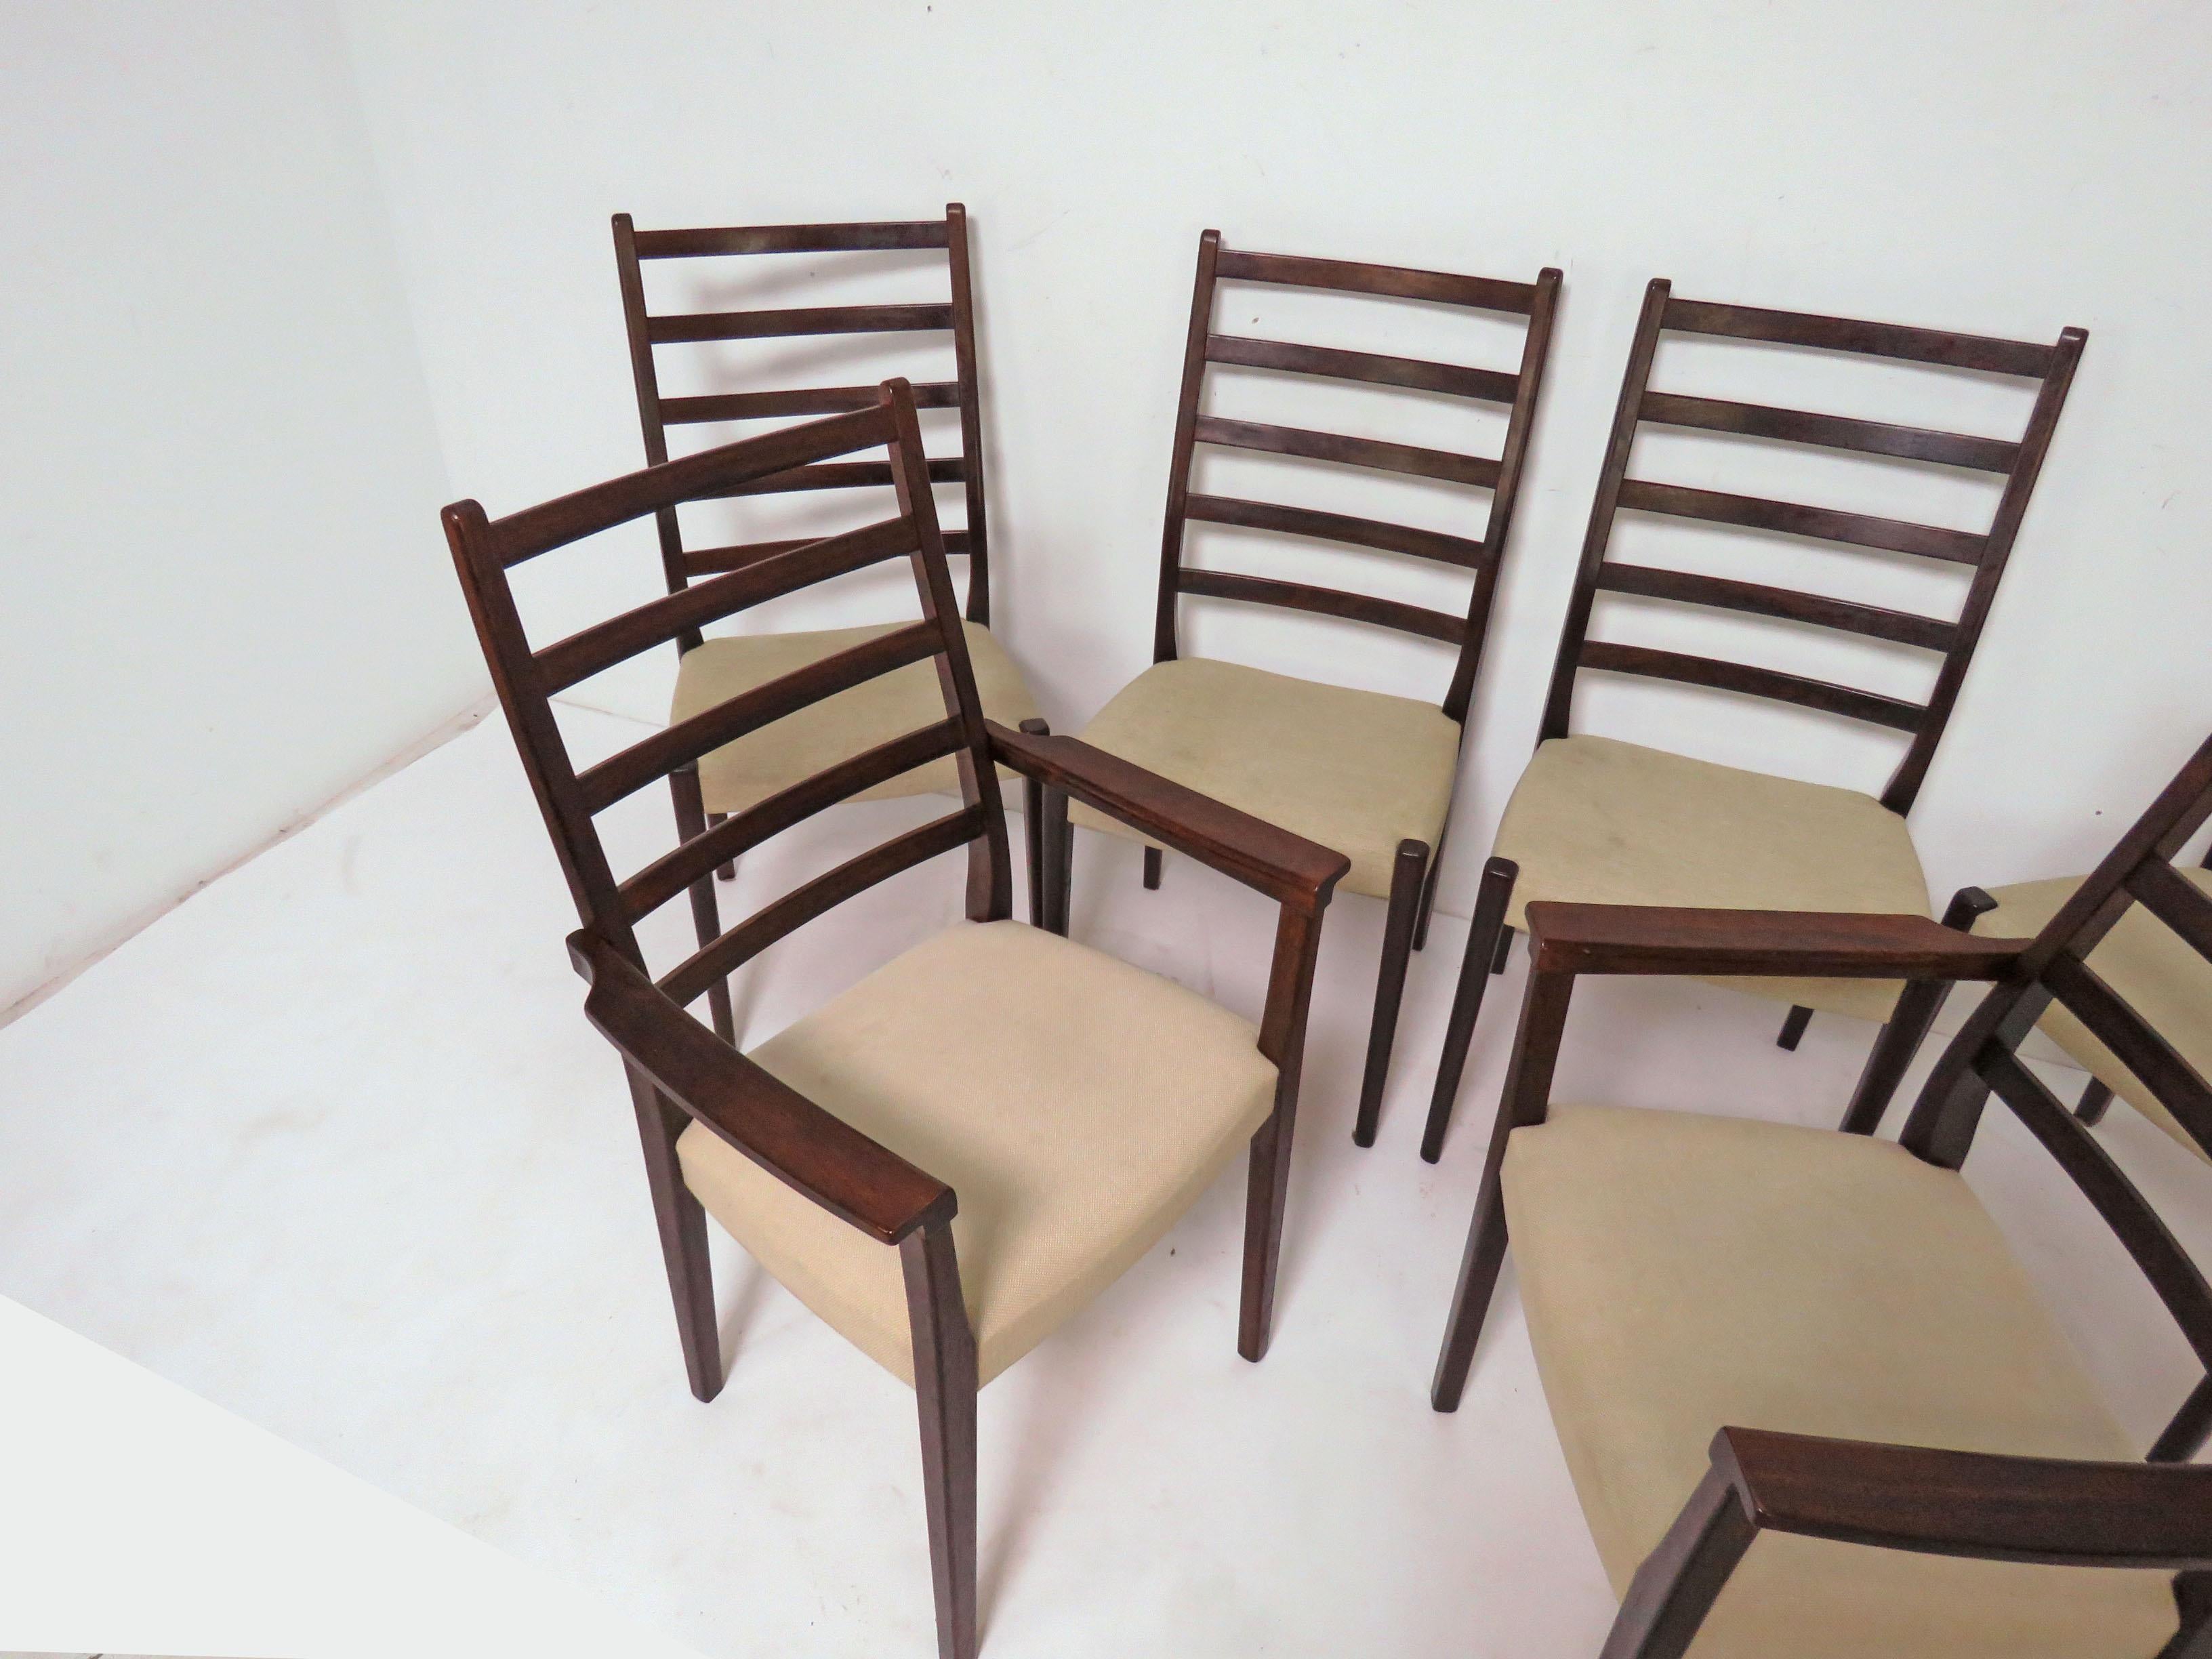 Set of six elegant rosewood ladder back dining chairs consisting of two-arm and four side chairs by Svegards of Markaryd, made in Sweden, circa 1970s.

Armchairs measure: 21.75